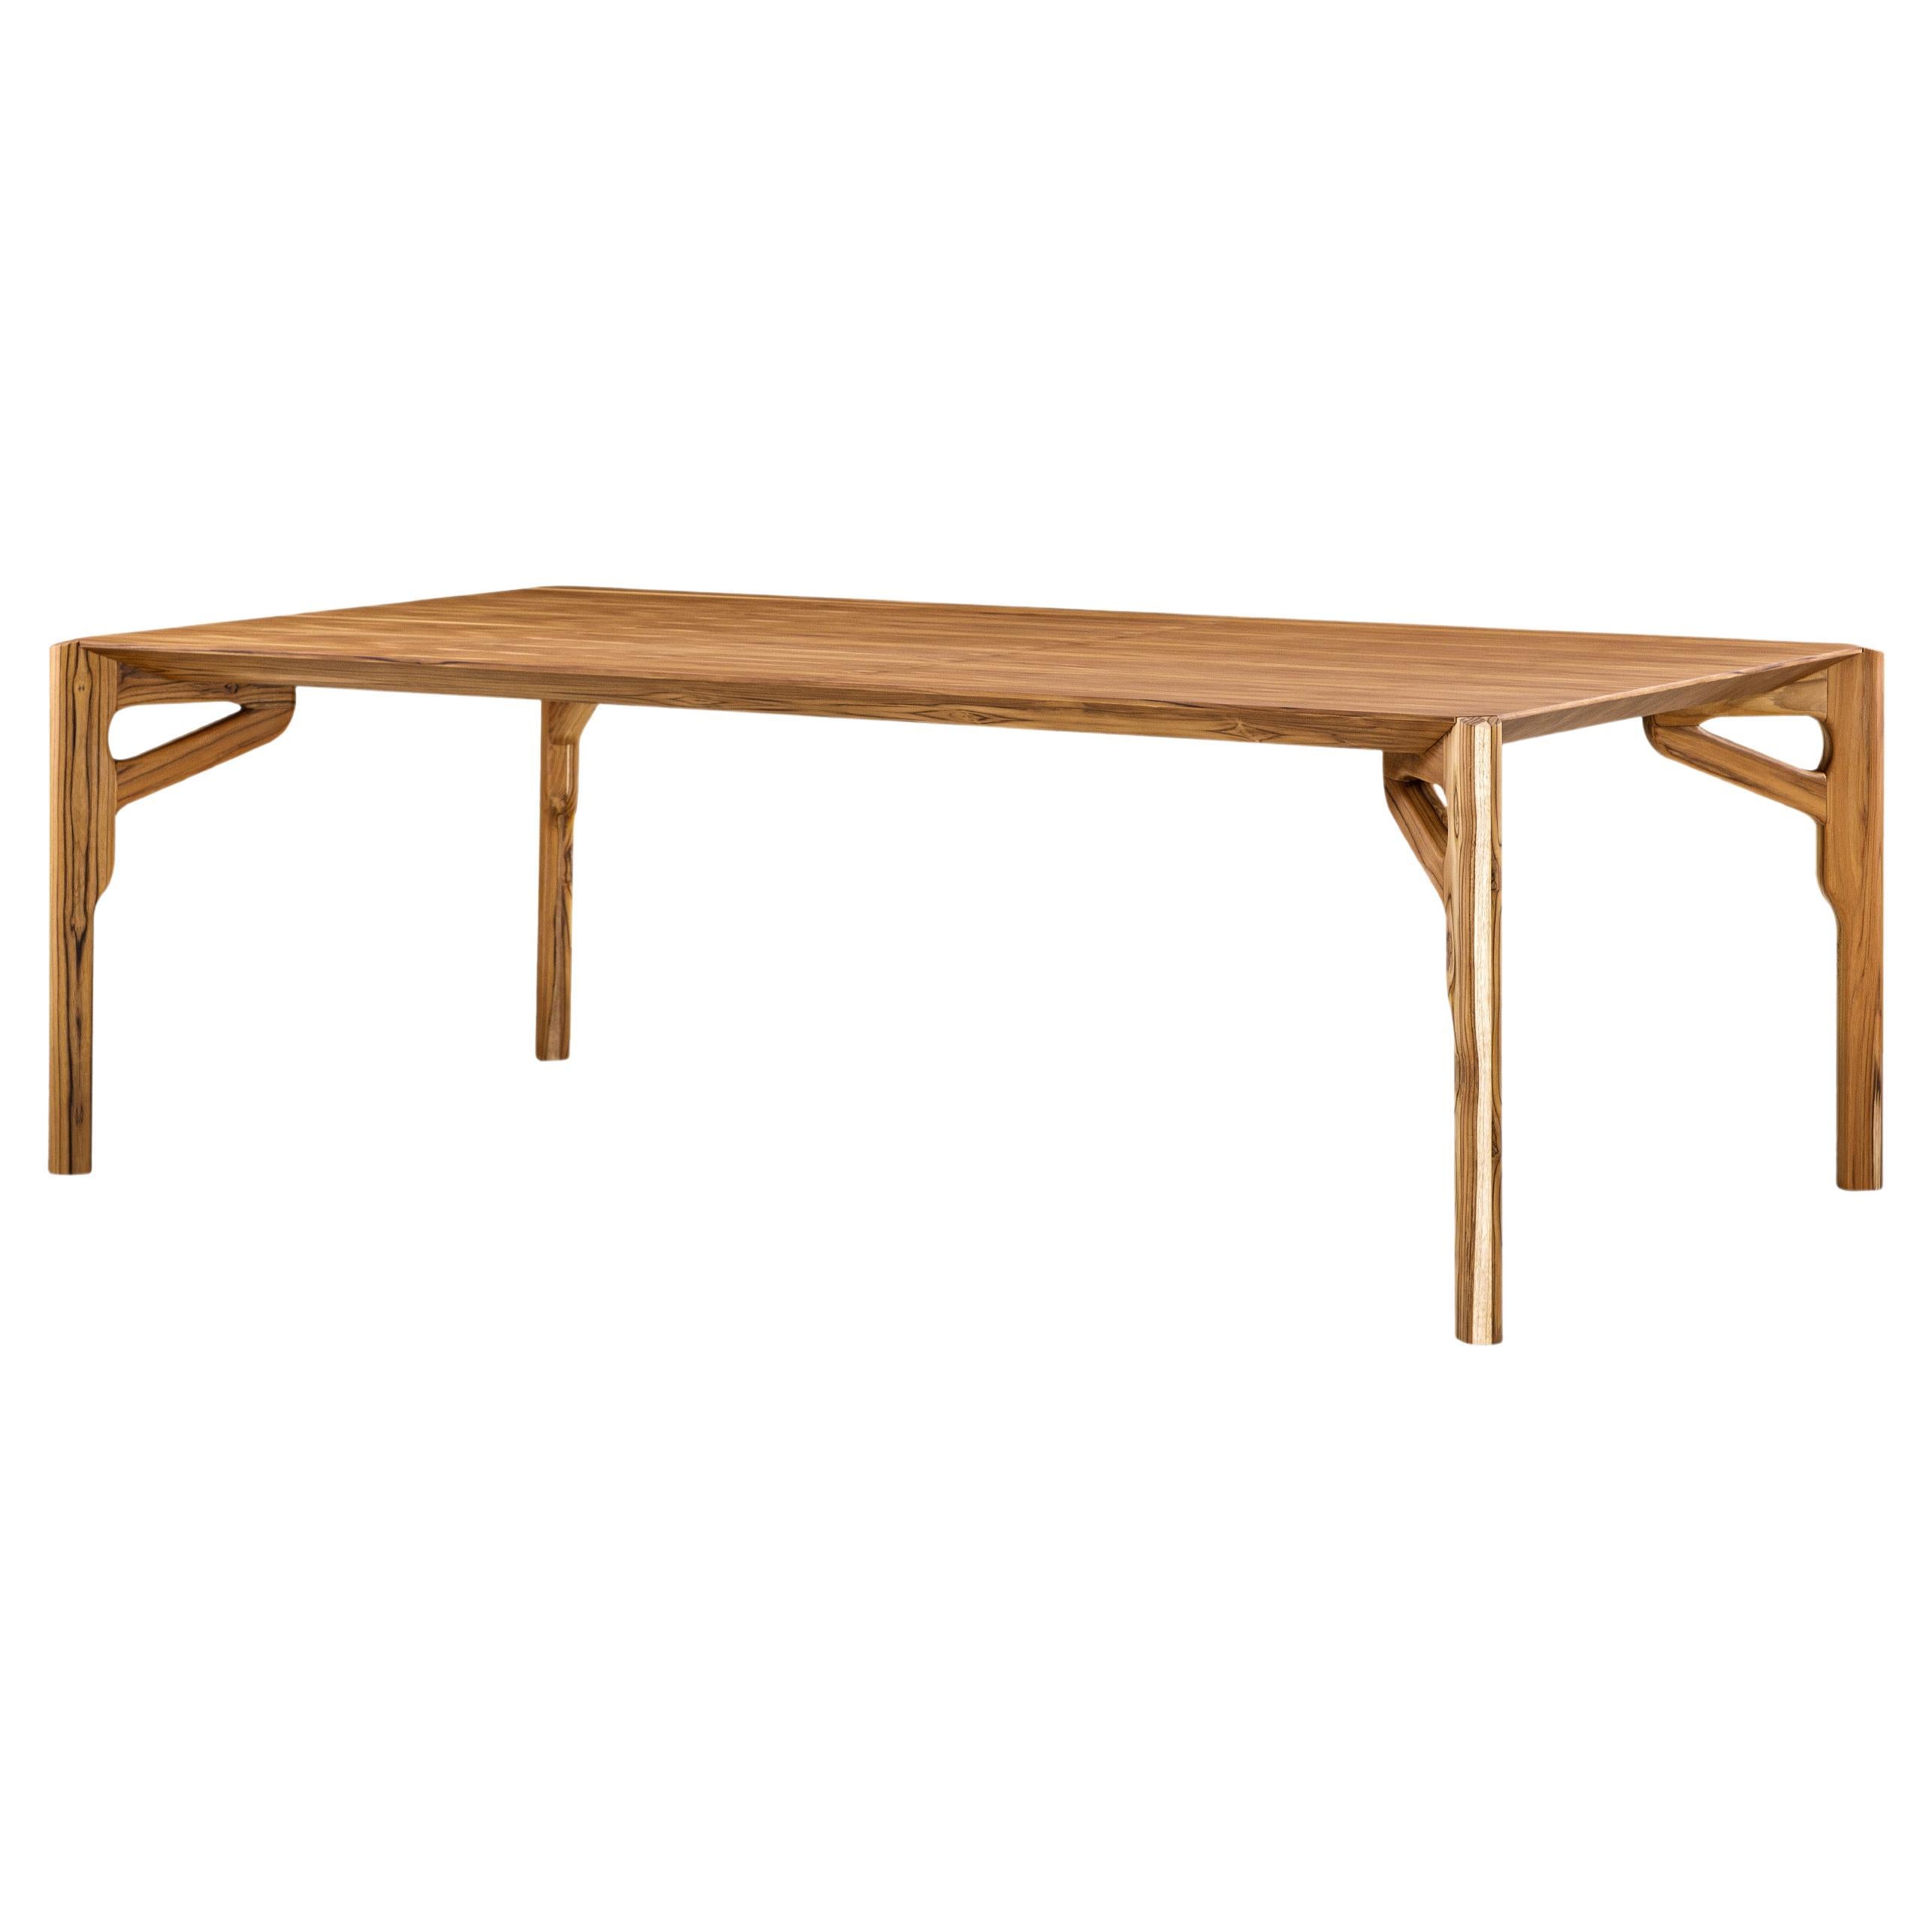 Hawk Dining Table with a Teak Wood Veneered Table Top 86'' For Sale